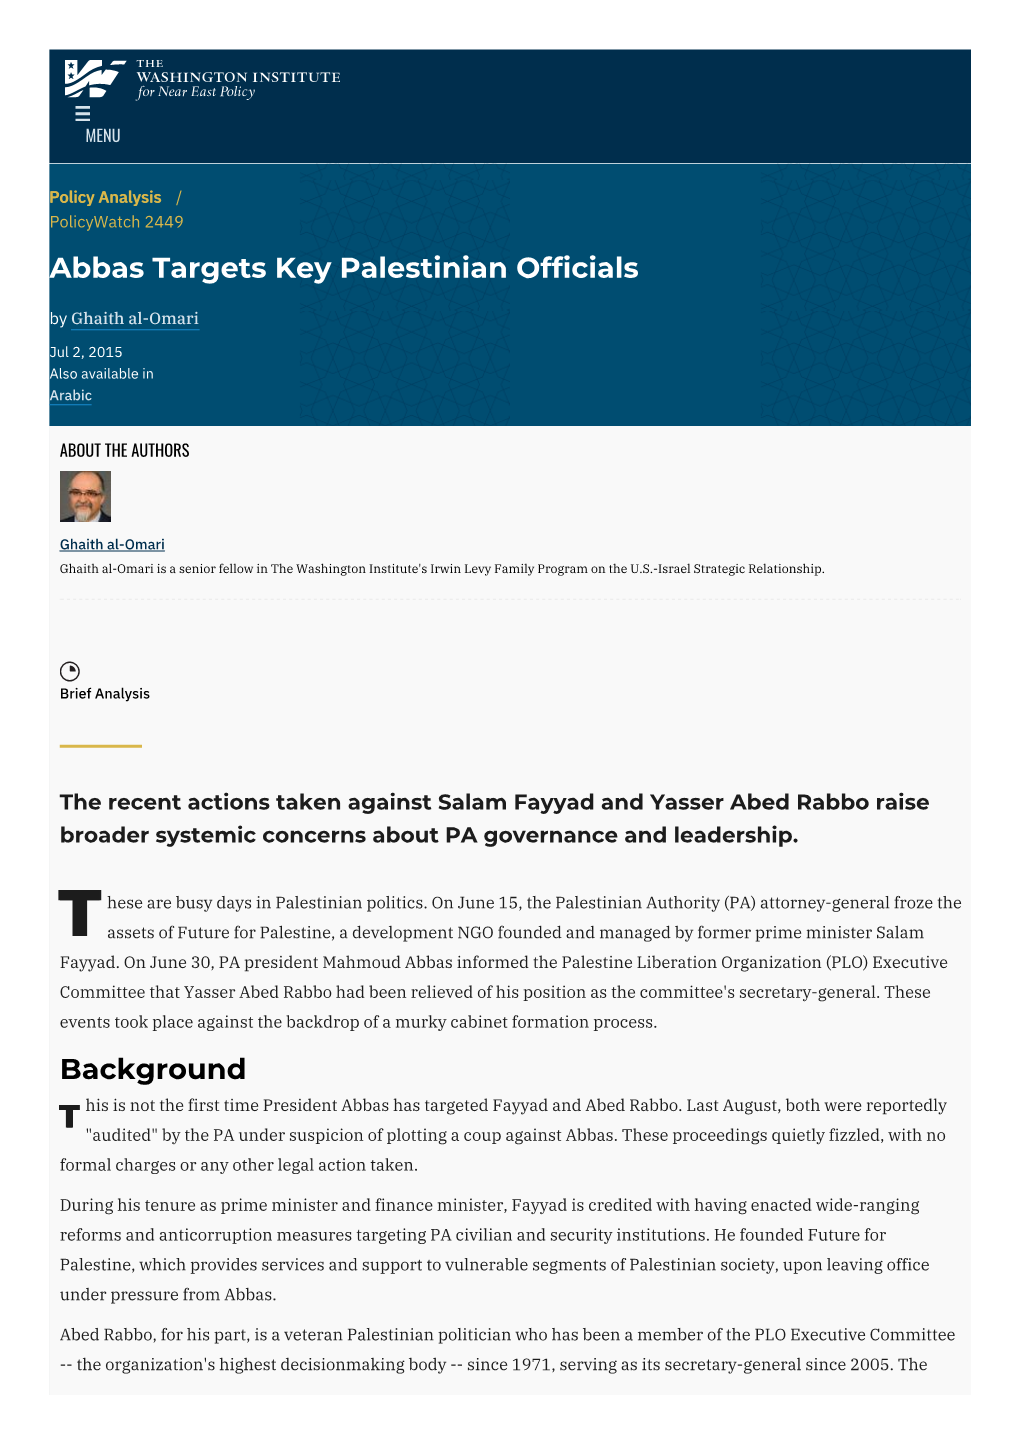 Abbas Targets Key Palestinian Officials | the Washington Institute